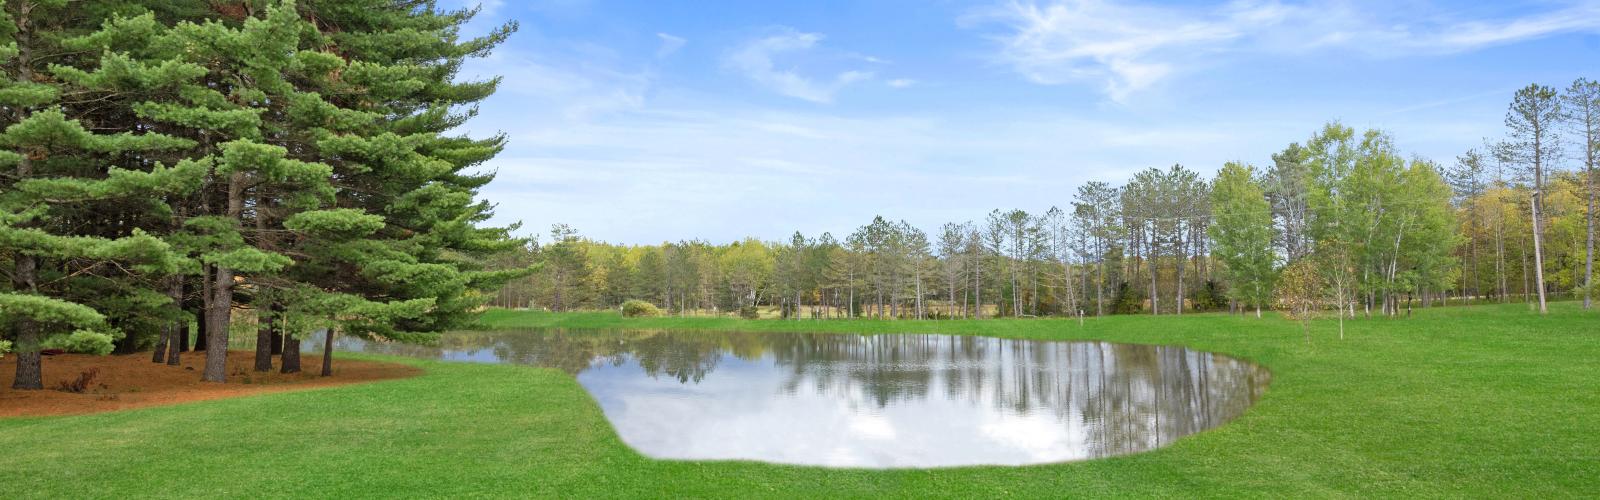 Take a Dip in our one-acre pond with beach